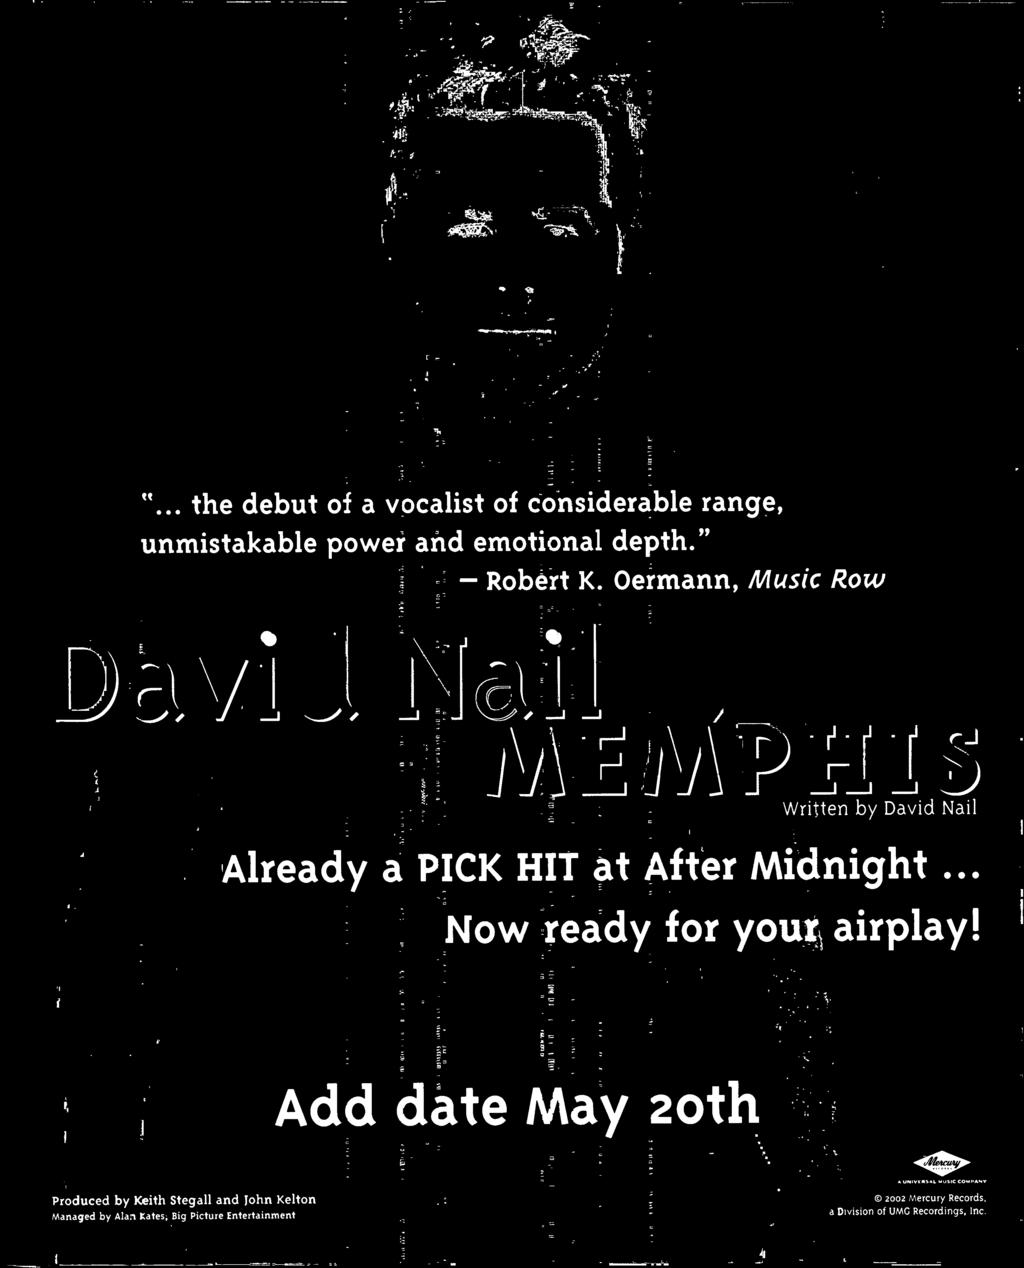 Add date May oth Produced by Keith Stegall and John Kelton vanaged